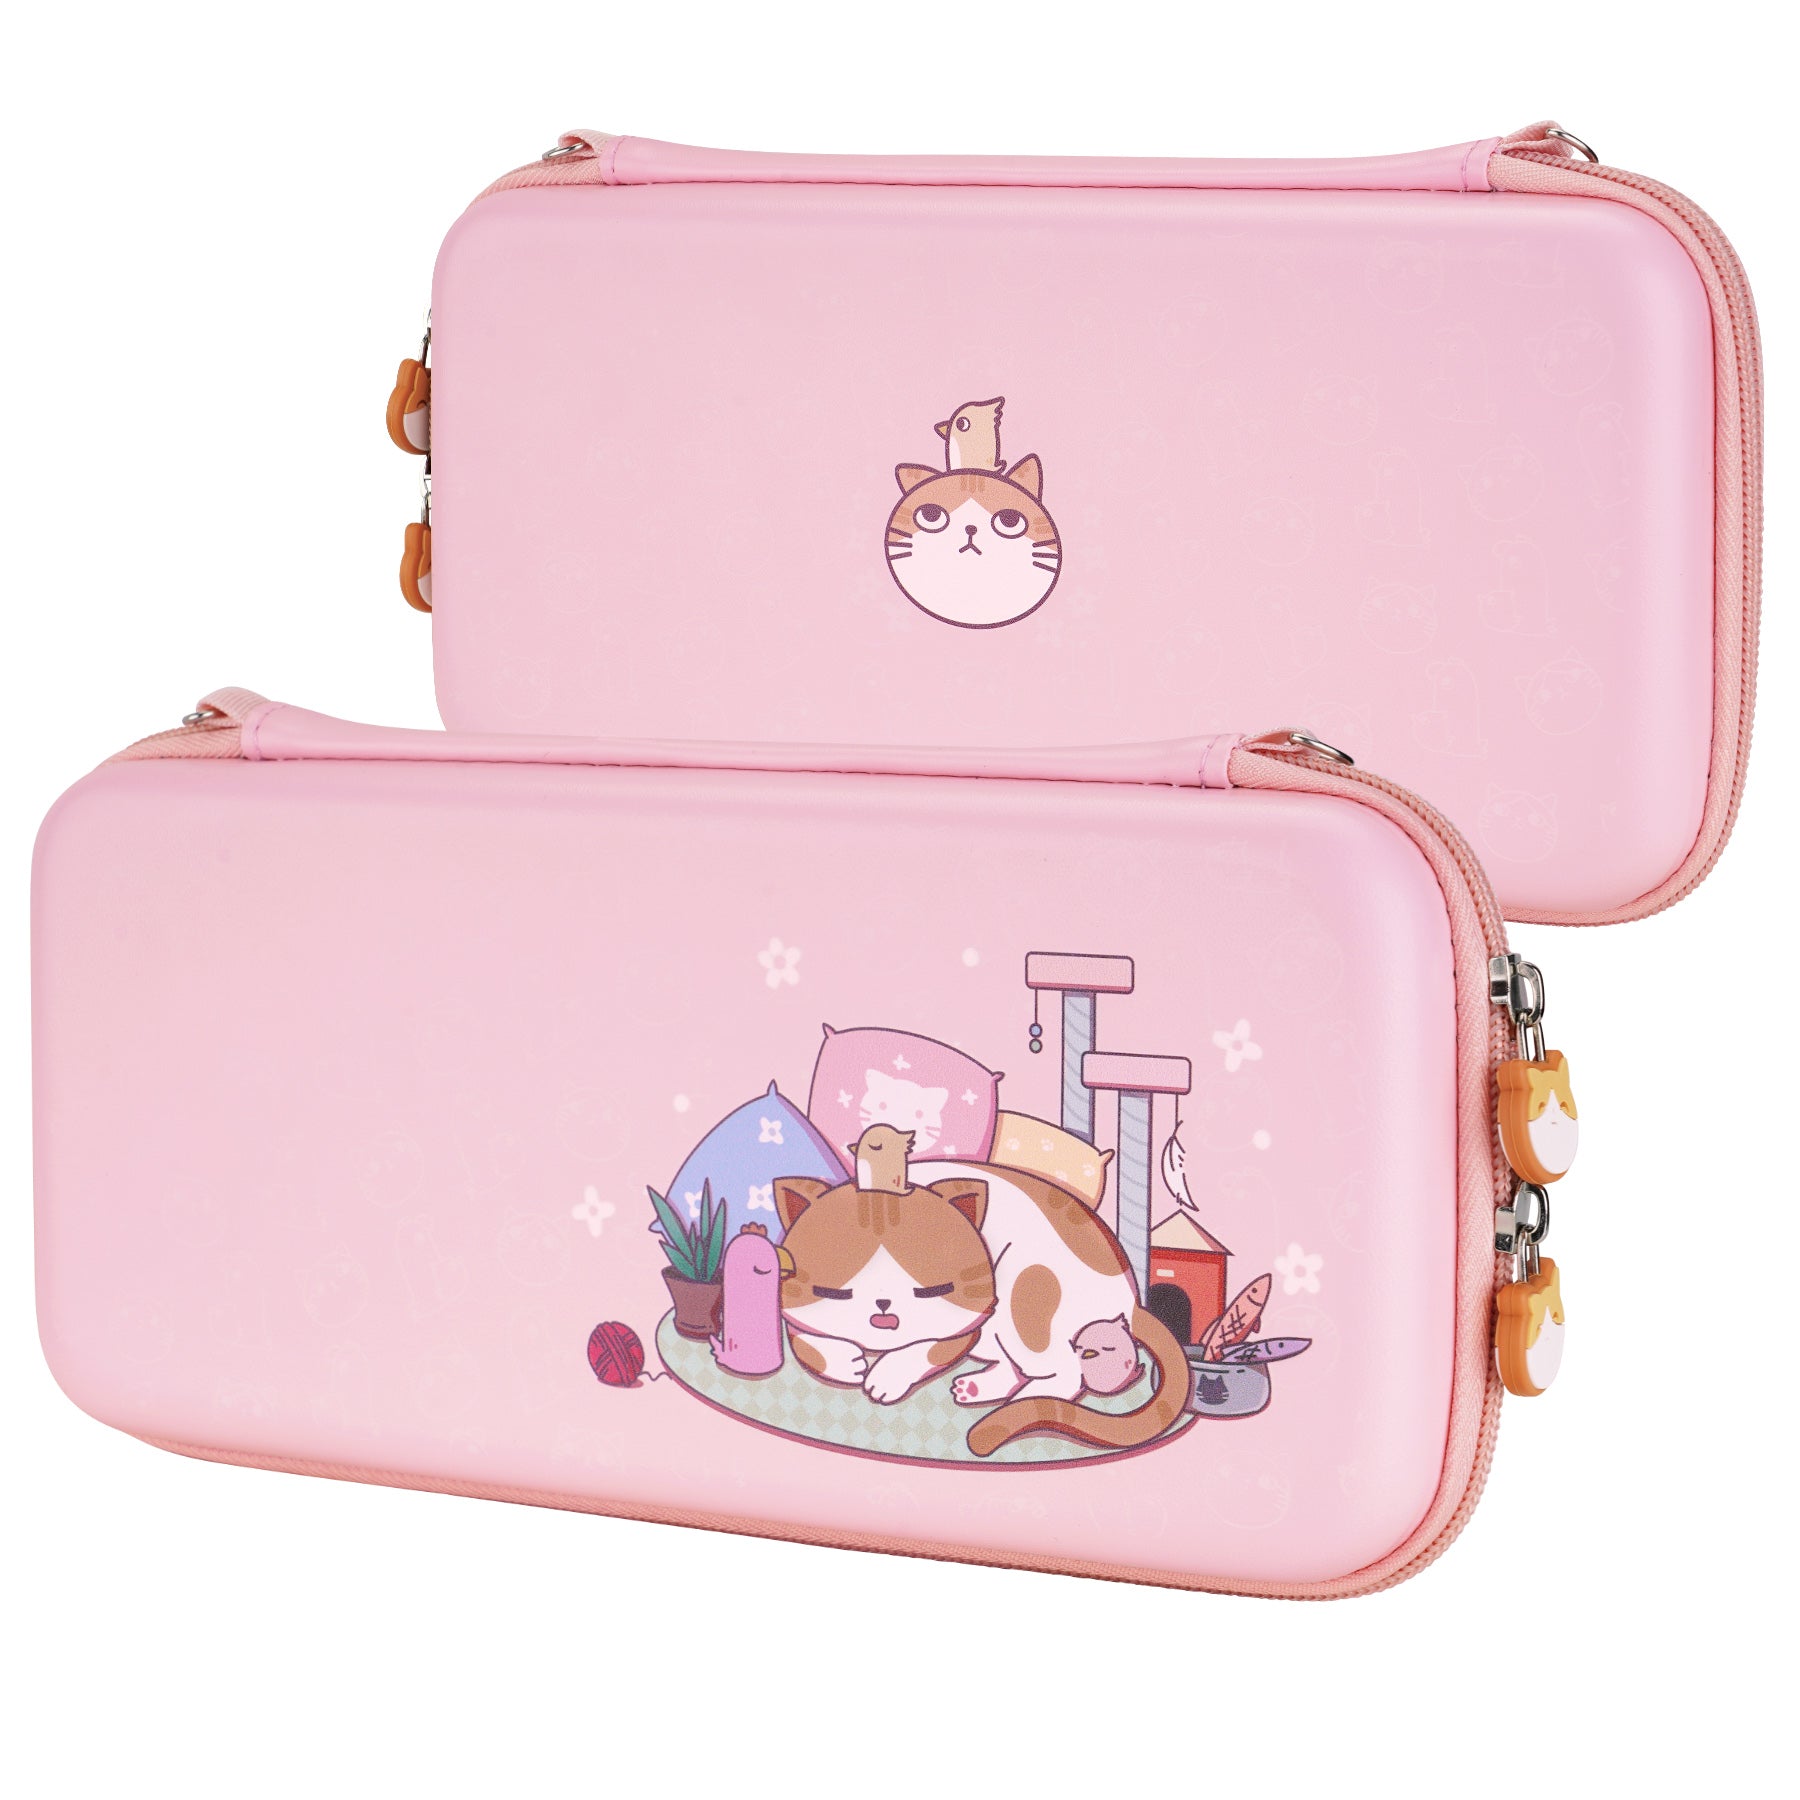 PlayVital Pink Cute Switch Carrying Case, Switch Portable Pouch, Soft Velvet Lining Switch Storage Bag, Travel Case for NS Switch OLED with Thumb Grips Game Cards Slots & Inner Pocket - Kitten & Chicken - NTW002 PlayVital